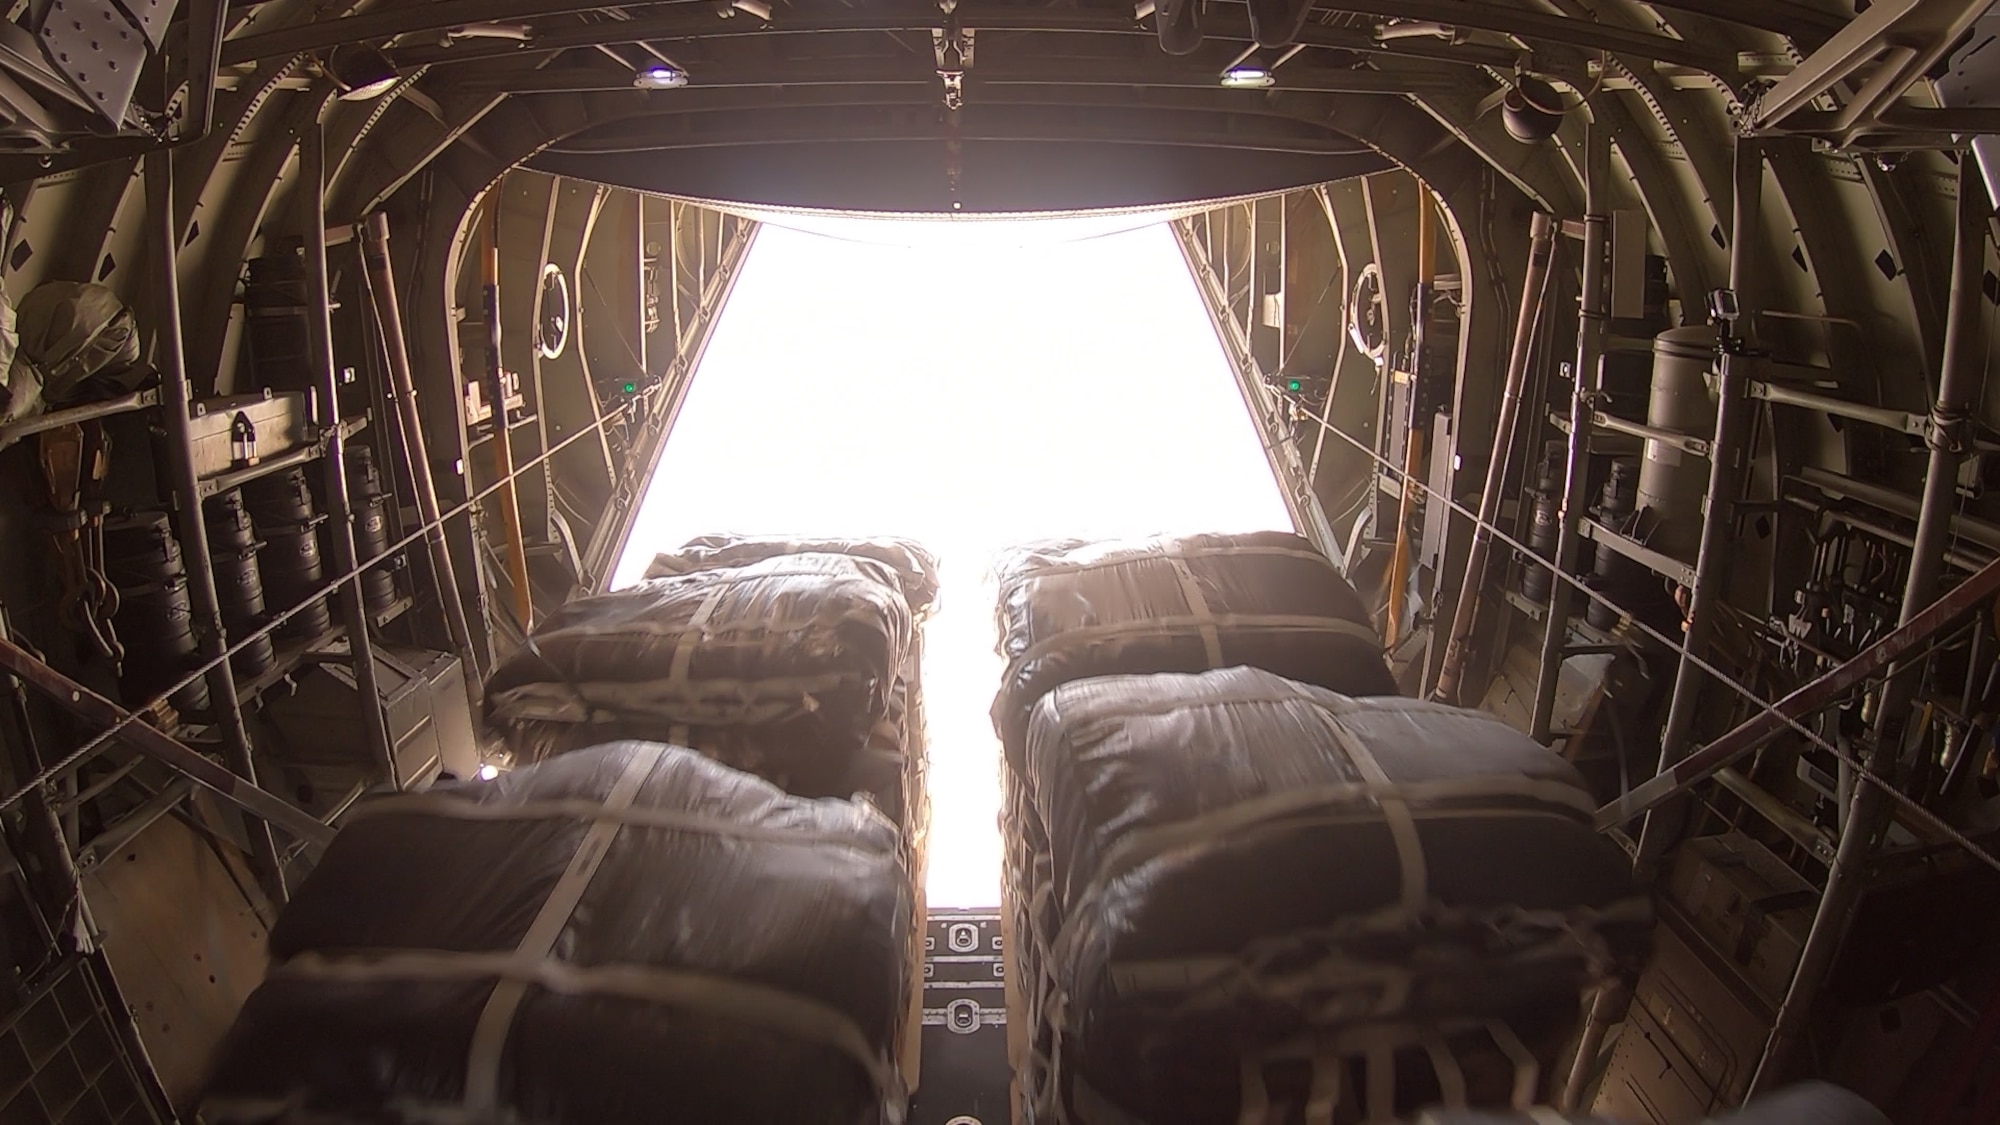 Airmen of the 746th and 816th Expeditionary Airlift Squadrons conduct the largest sustainment airdrop in the area of responsibility’s history July 11, 2019. An airdrop is a delivery method used to provide vital supplies to service members in remote or combat locations. (U.S. Air Force photo)